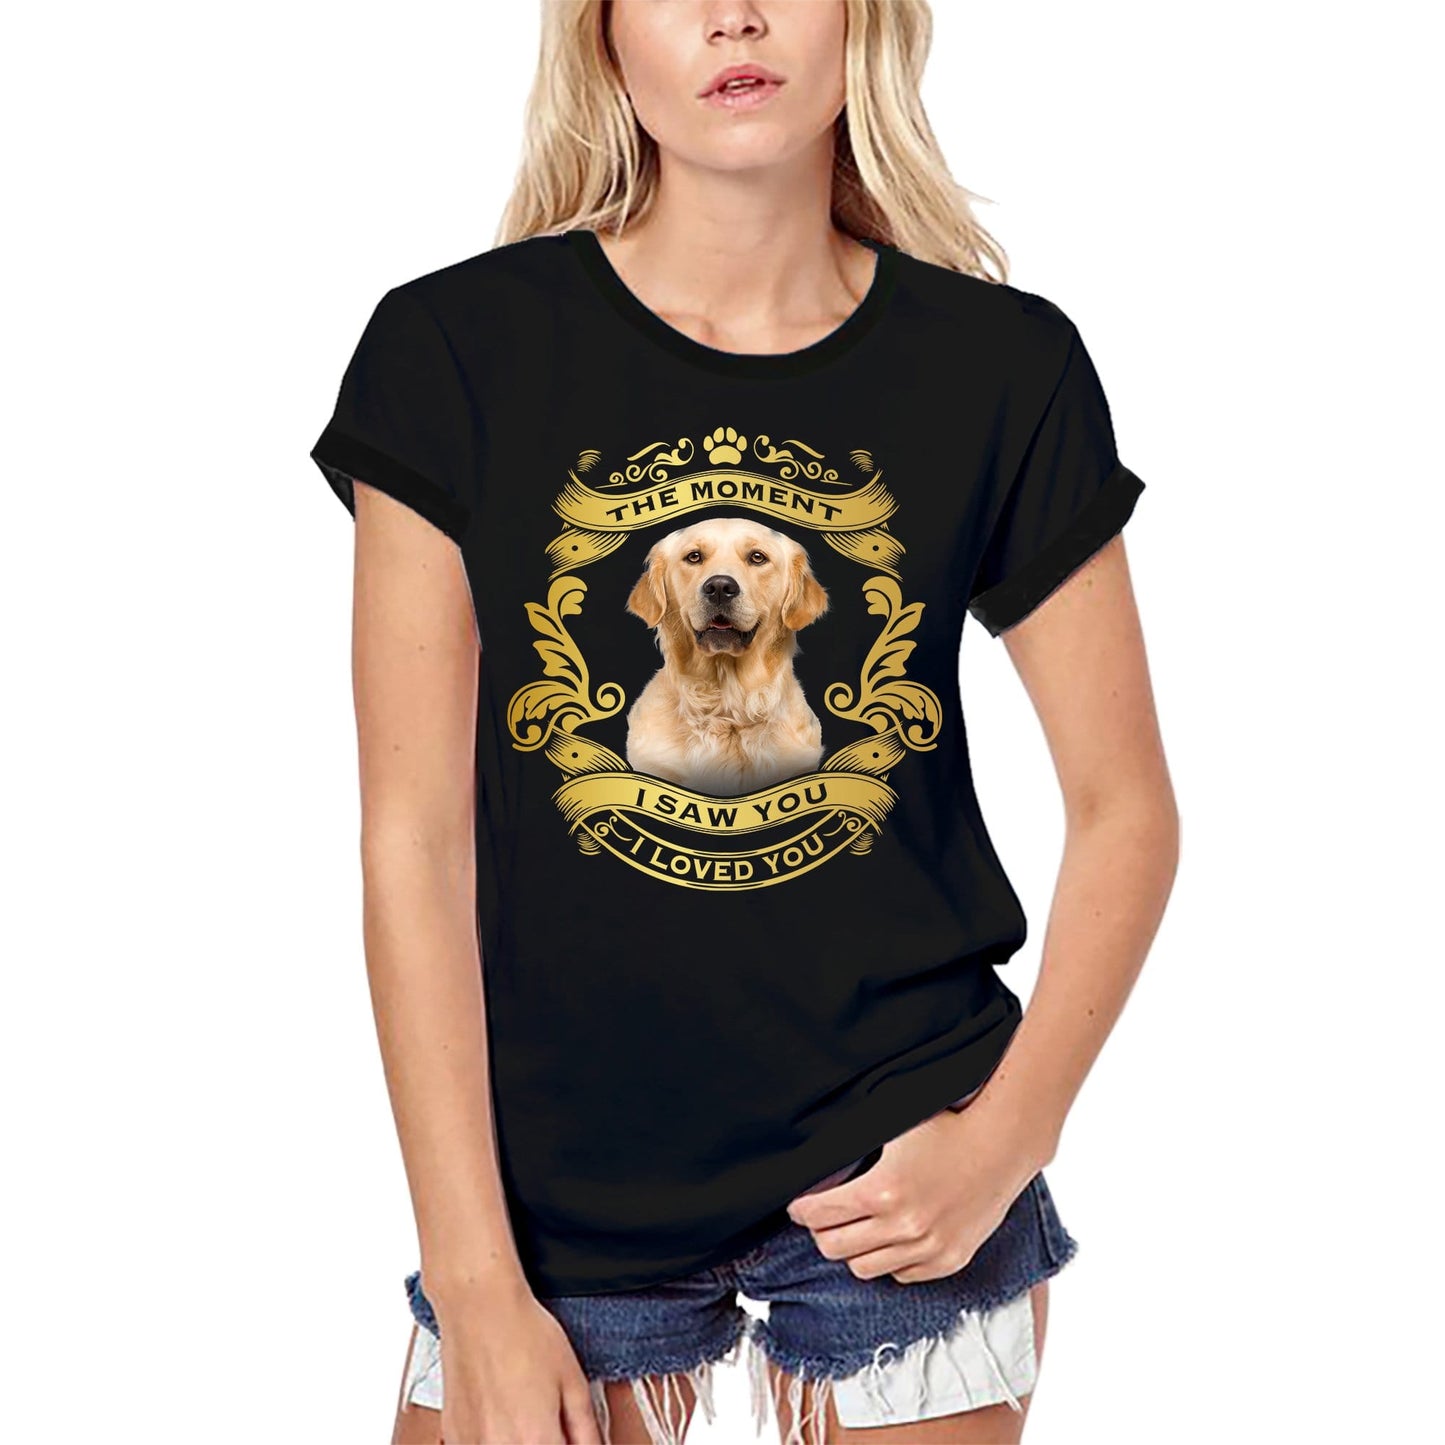 ULTRABASIC Women's Organic T-Shirt Golden Retriever Dog - Moment I Saw You I Loved You Puppy Tee Shirt for Ladies